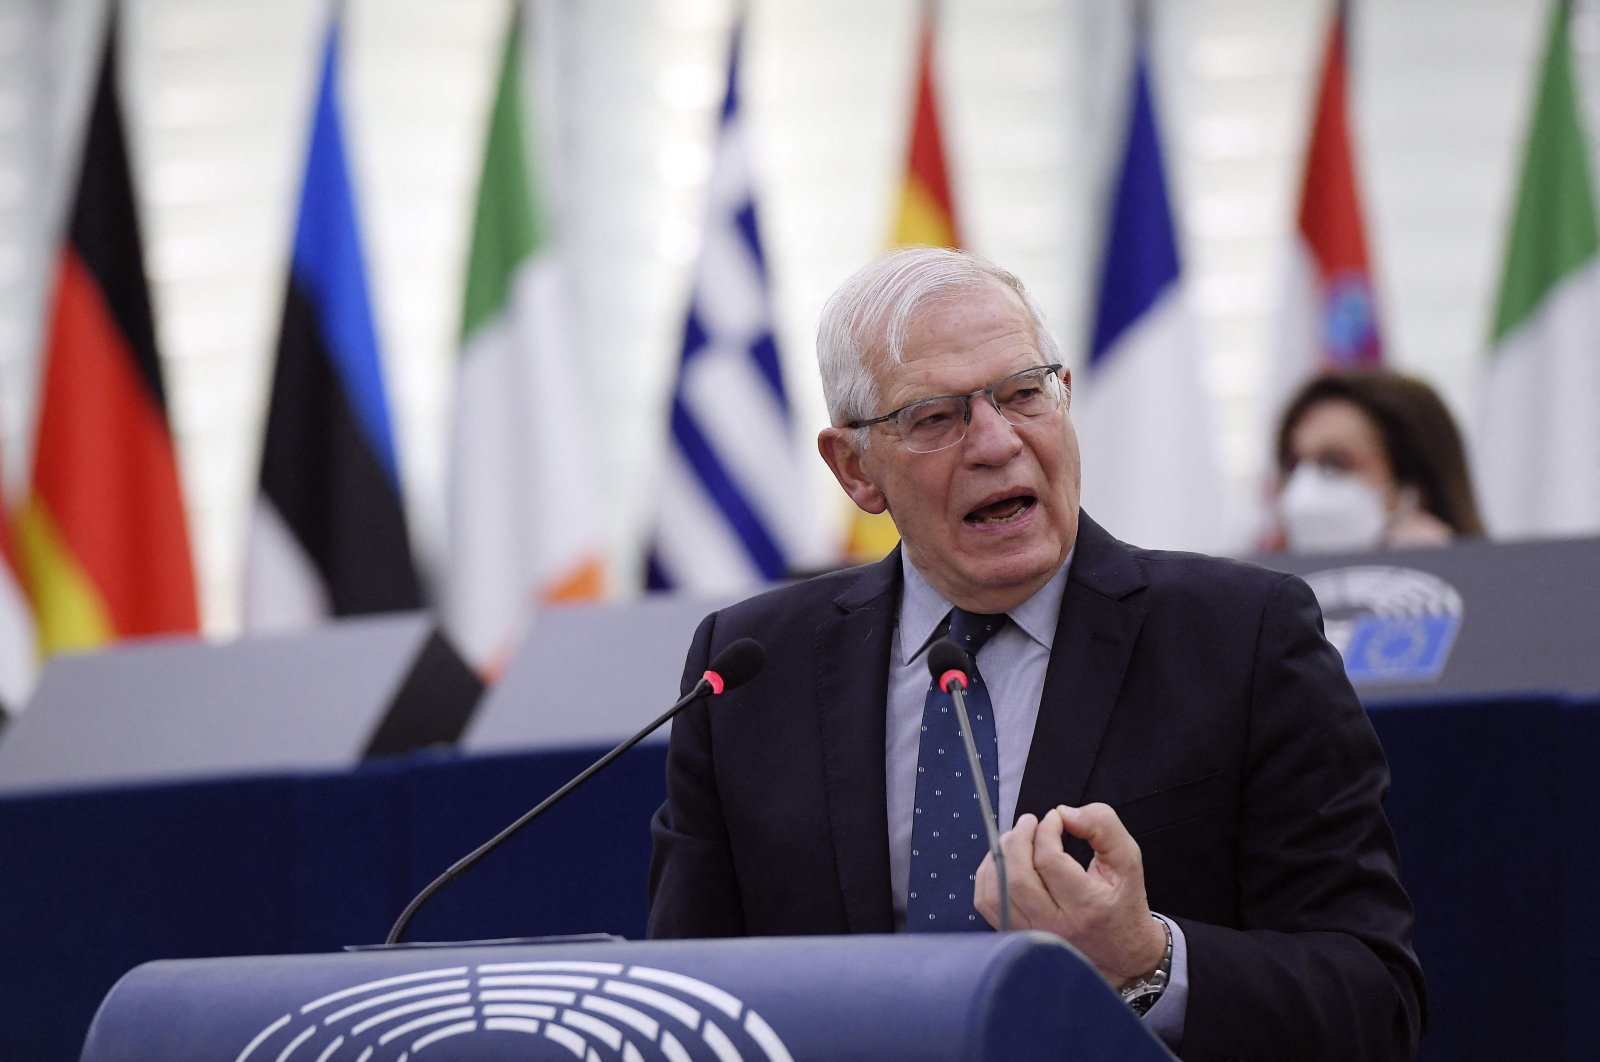 European Union Foreign Policy chief Josep Borrell speaks during a debate on foreign interference in all democratic processes in the EU, including disinformation, during a plenary session at the European Parliament in Strasbourg, France, March 8, 2022. (AFP Photo)